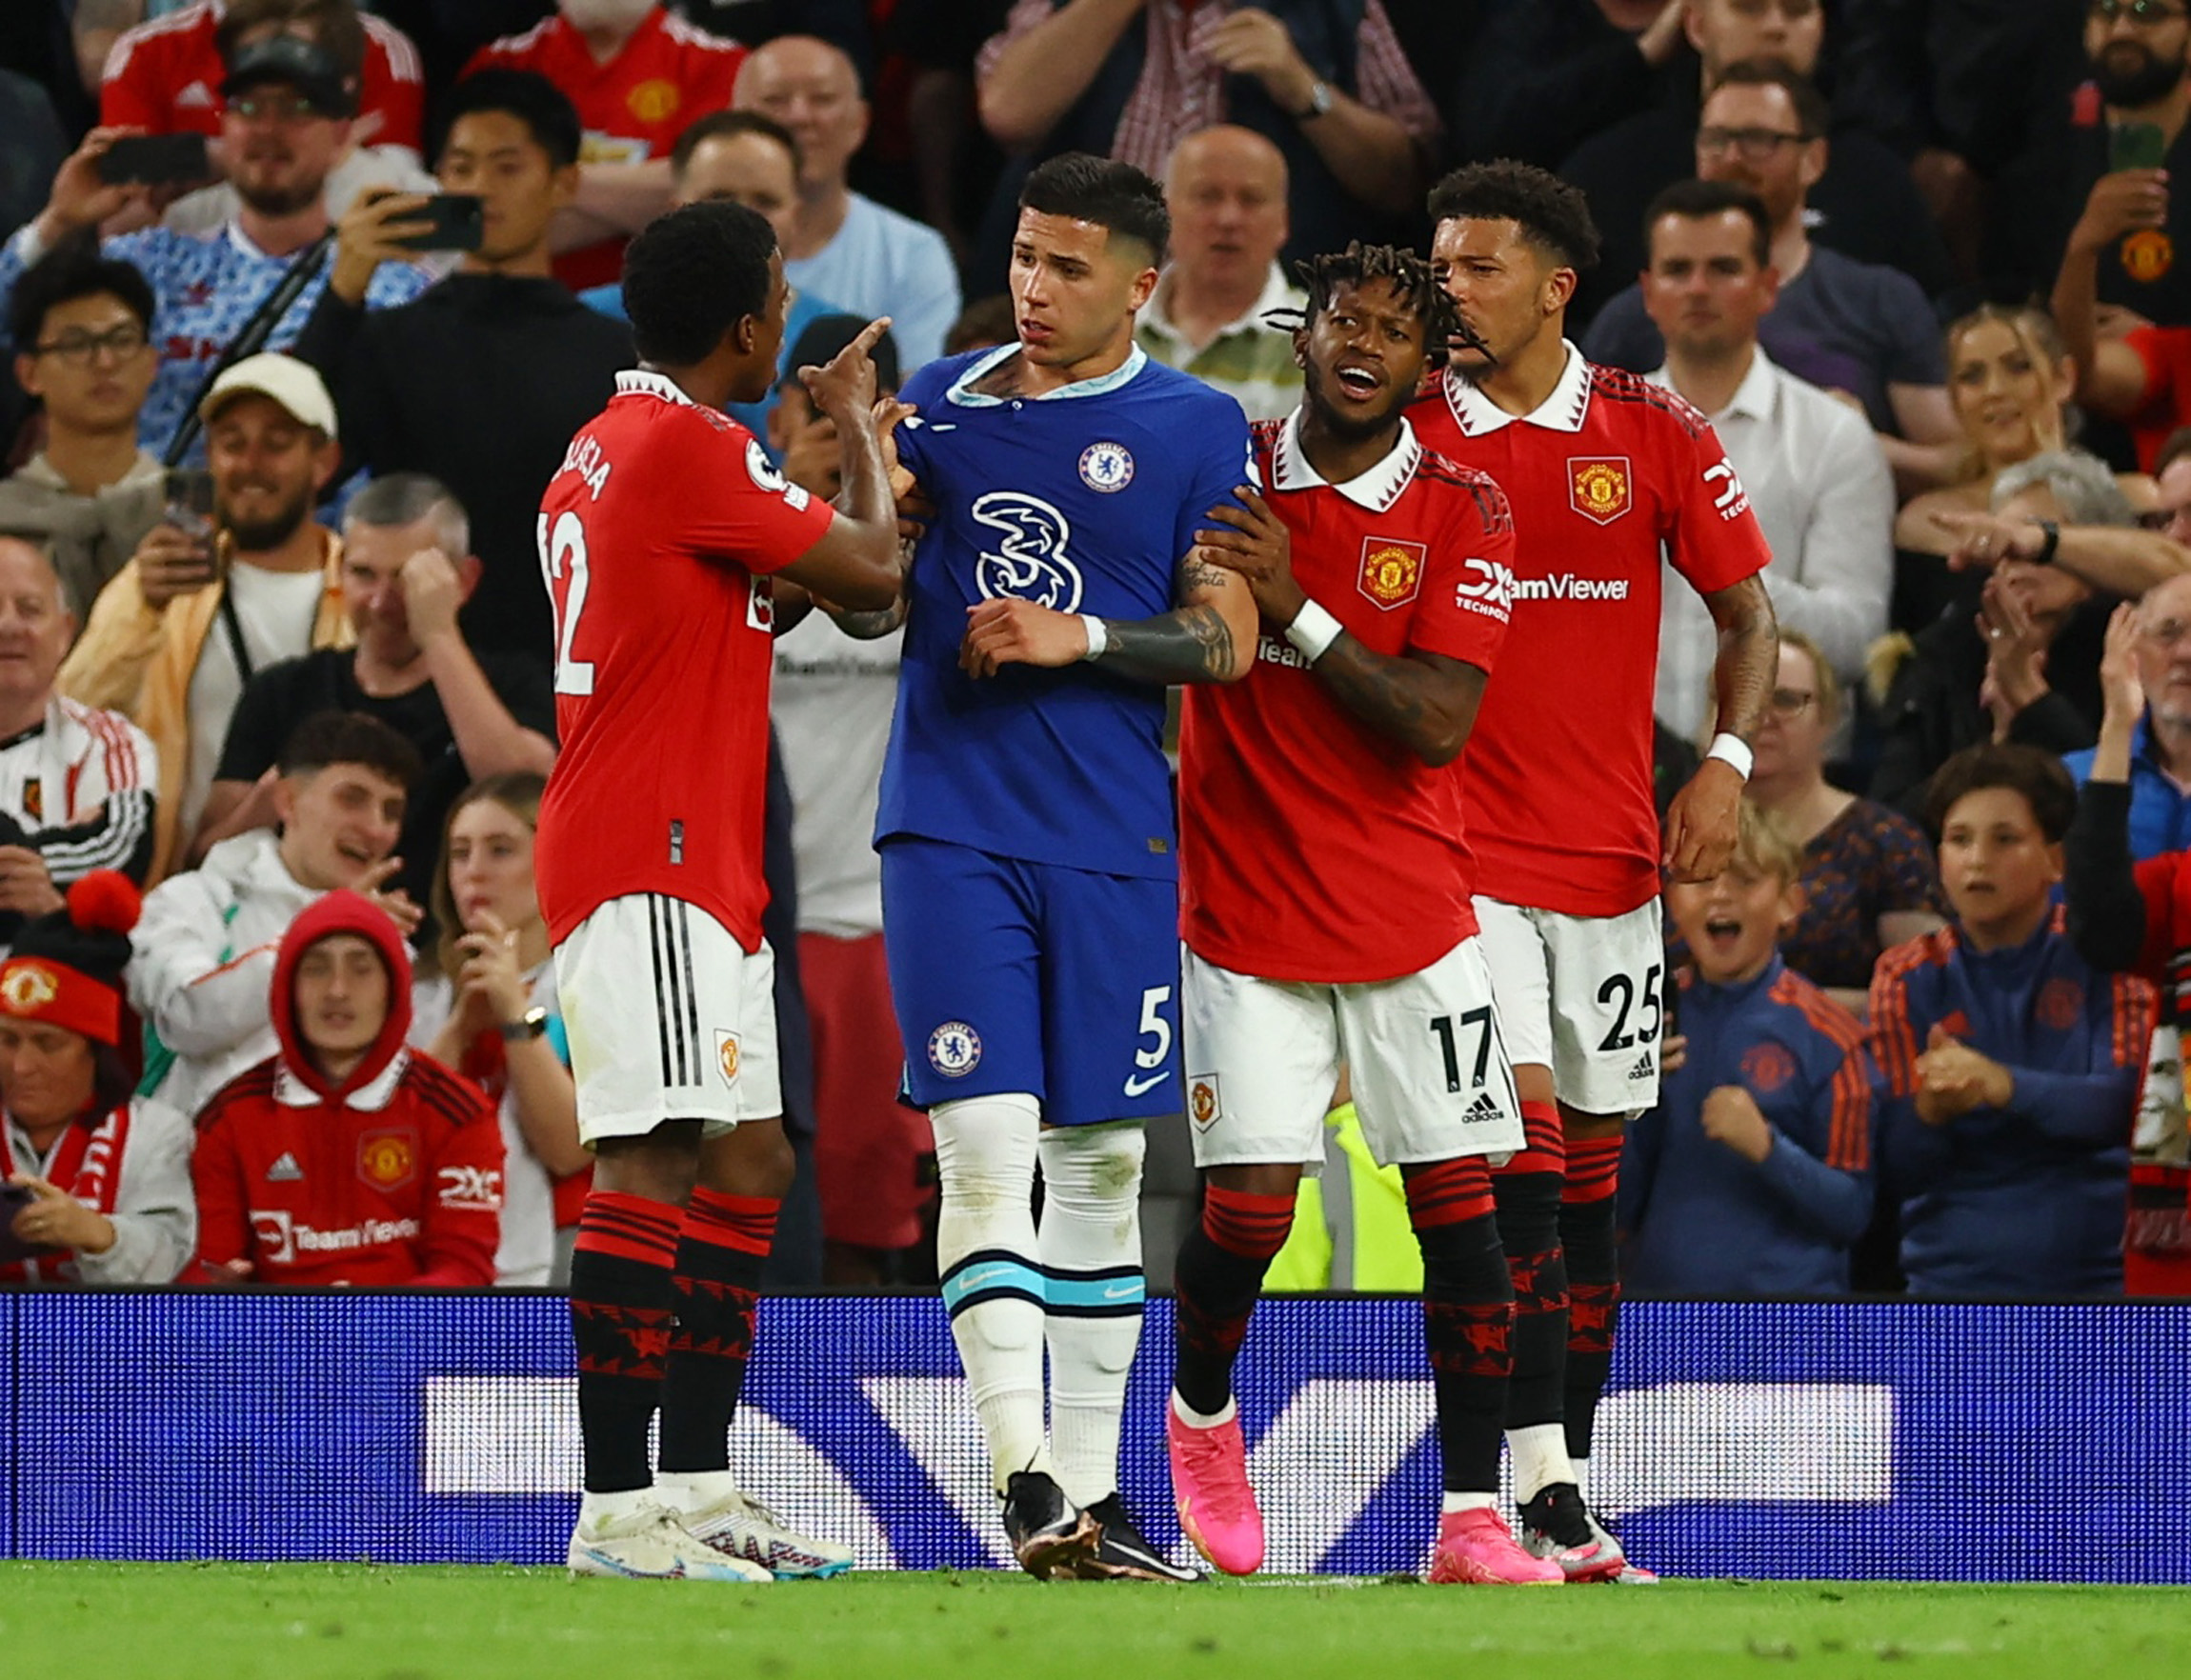 Manchester United's Tyrell Malacia clashes with Chelsea's Enzo Fernandez as Manchester United's Fred and Jadon Sancho react REUTERS/Molly Darlington